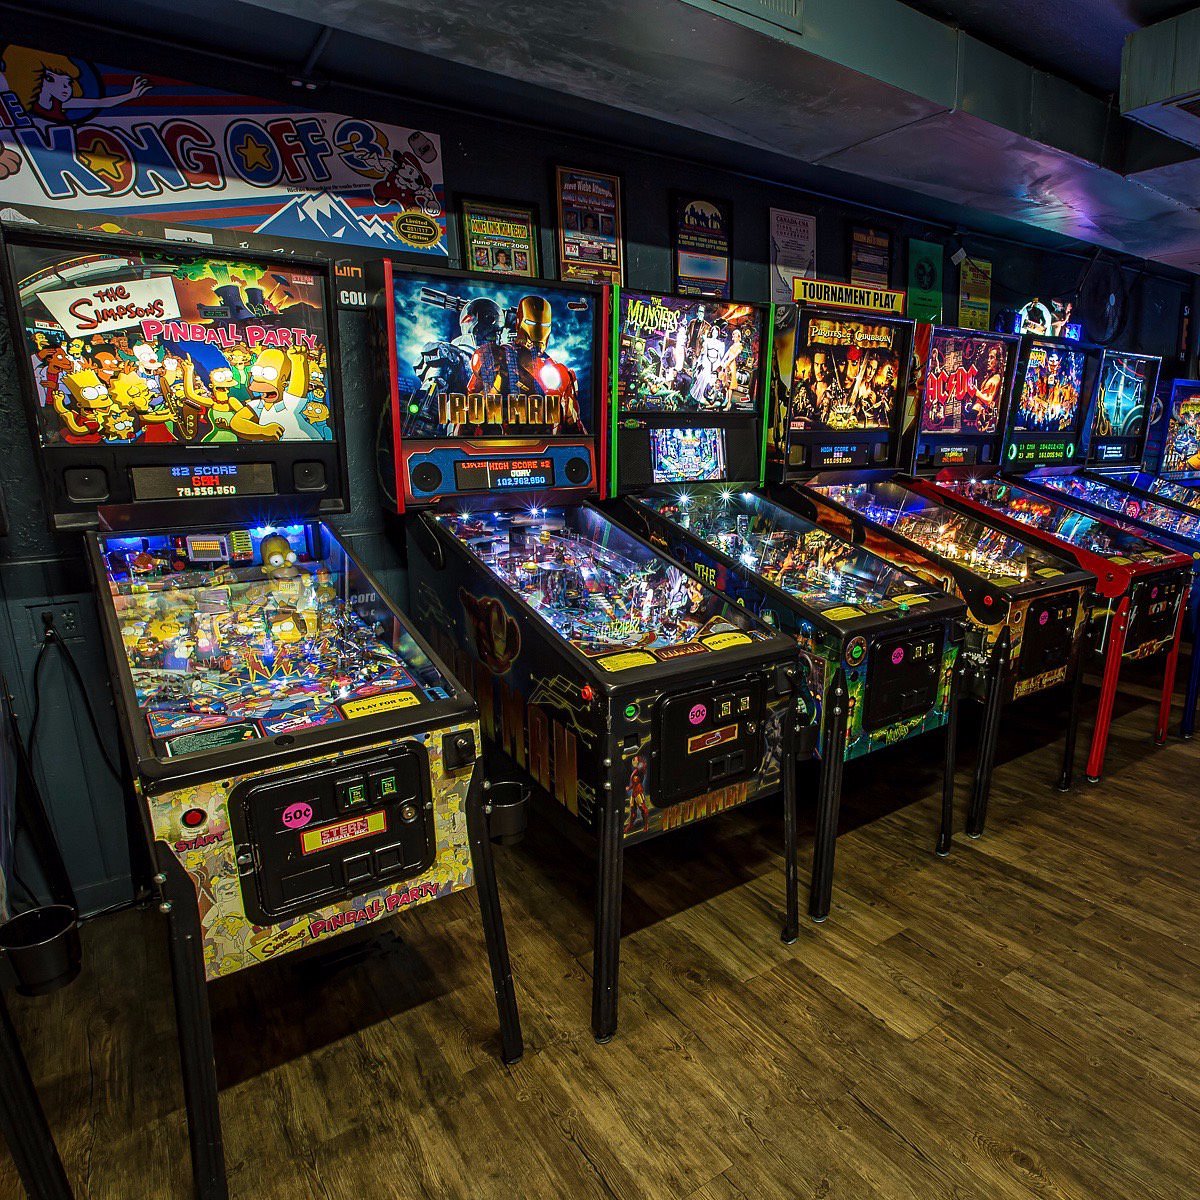 Downtown Ogden's new Lit Arcade Bar brings retro atmosphere to